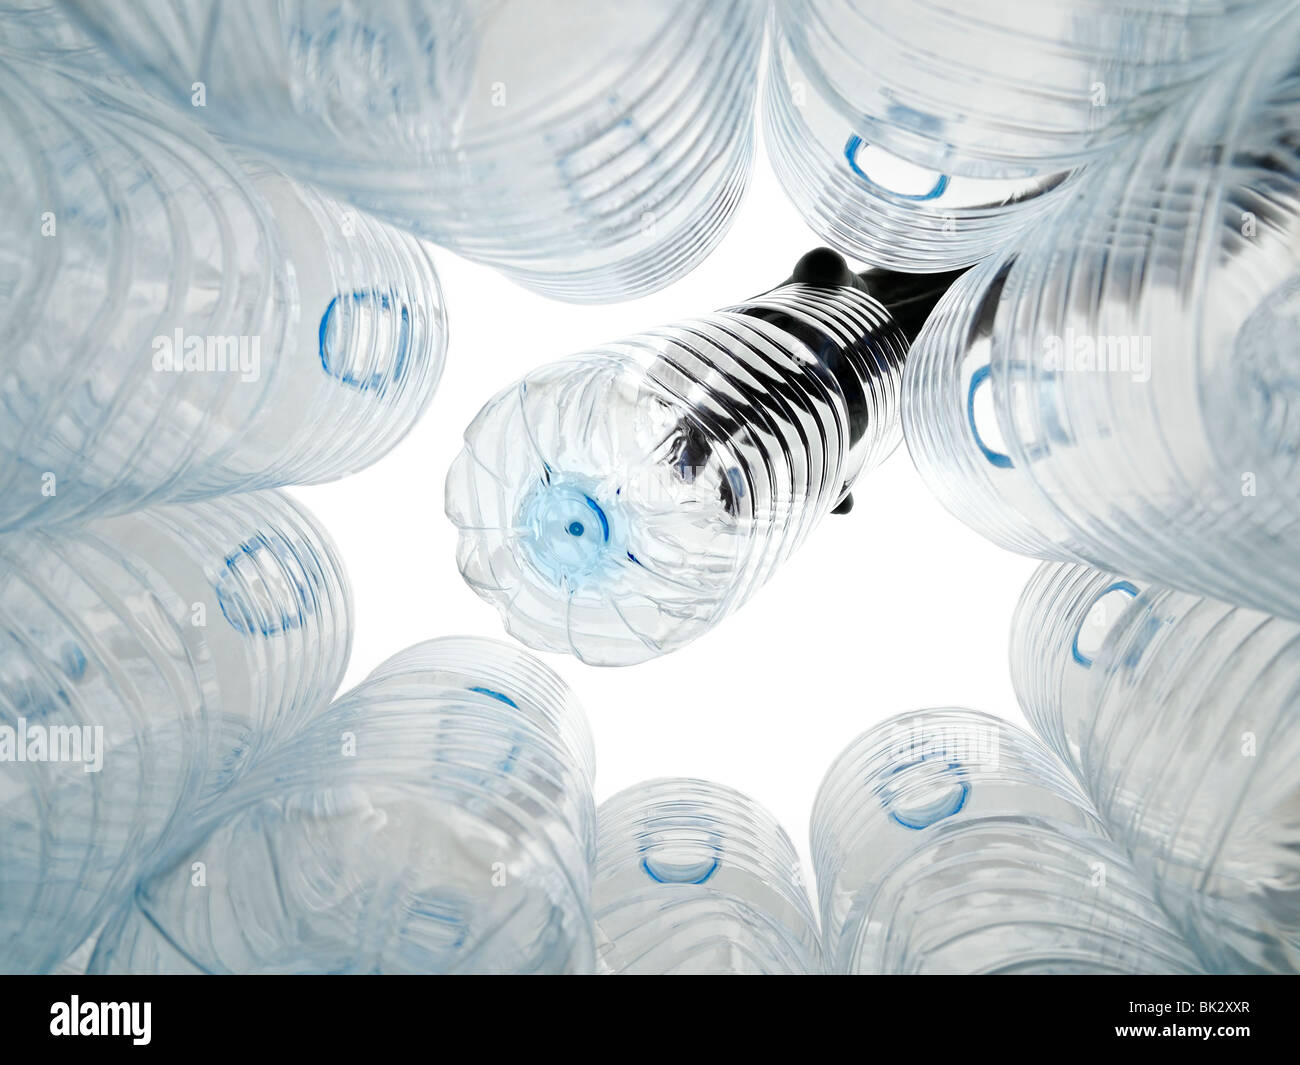 Plastic Bottle Being Put Into a Recycling Bin Stock Photo